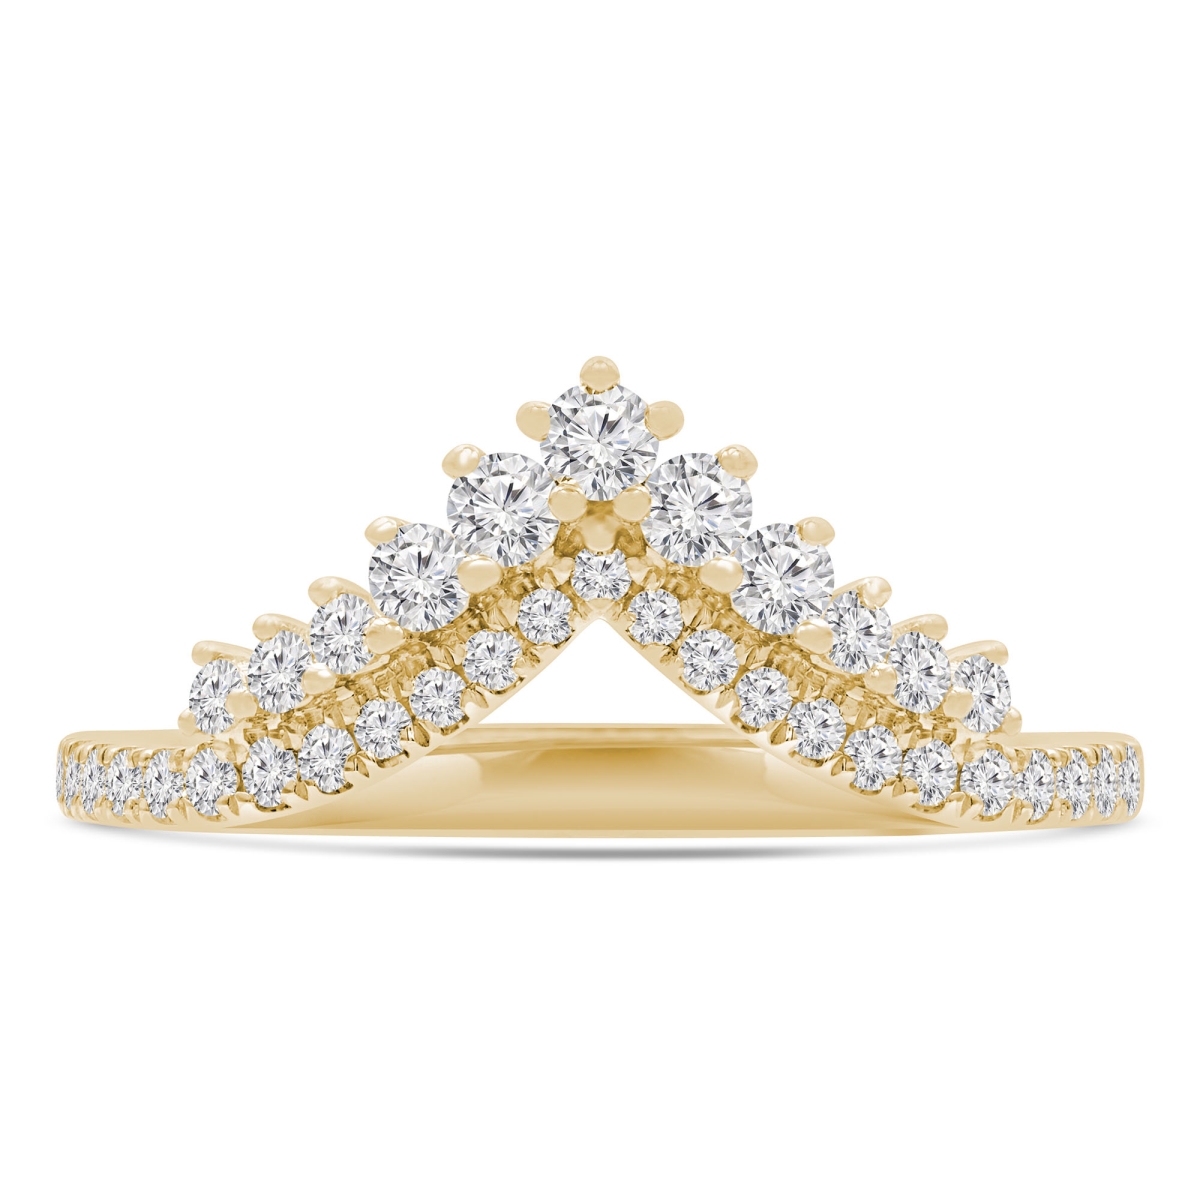 MDR220215-5.5 0.38 CTW Round Diamond Two-Row Tiara Shared Prong Semi-Eternity Anniversary Wedding Band Ring in 14K Yellow Gold - Size 5.5 -  Majesty Diamonds